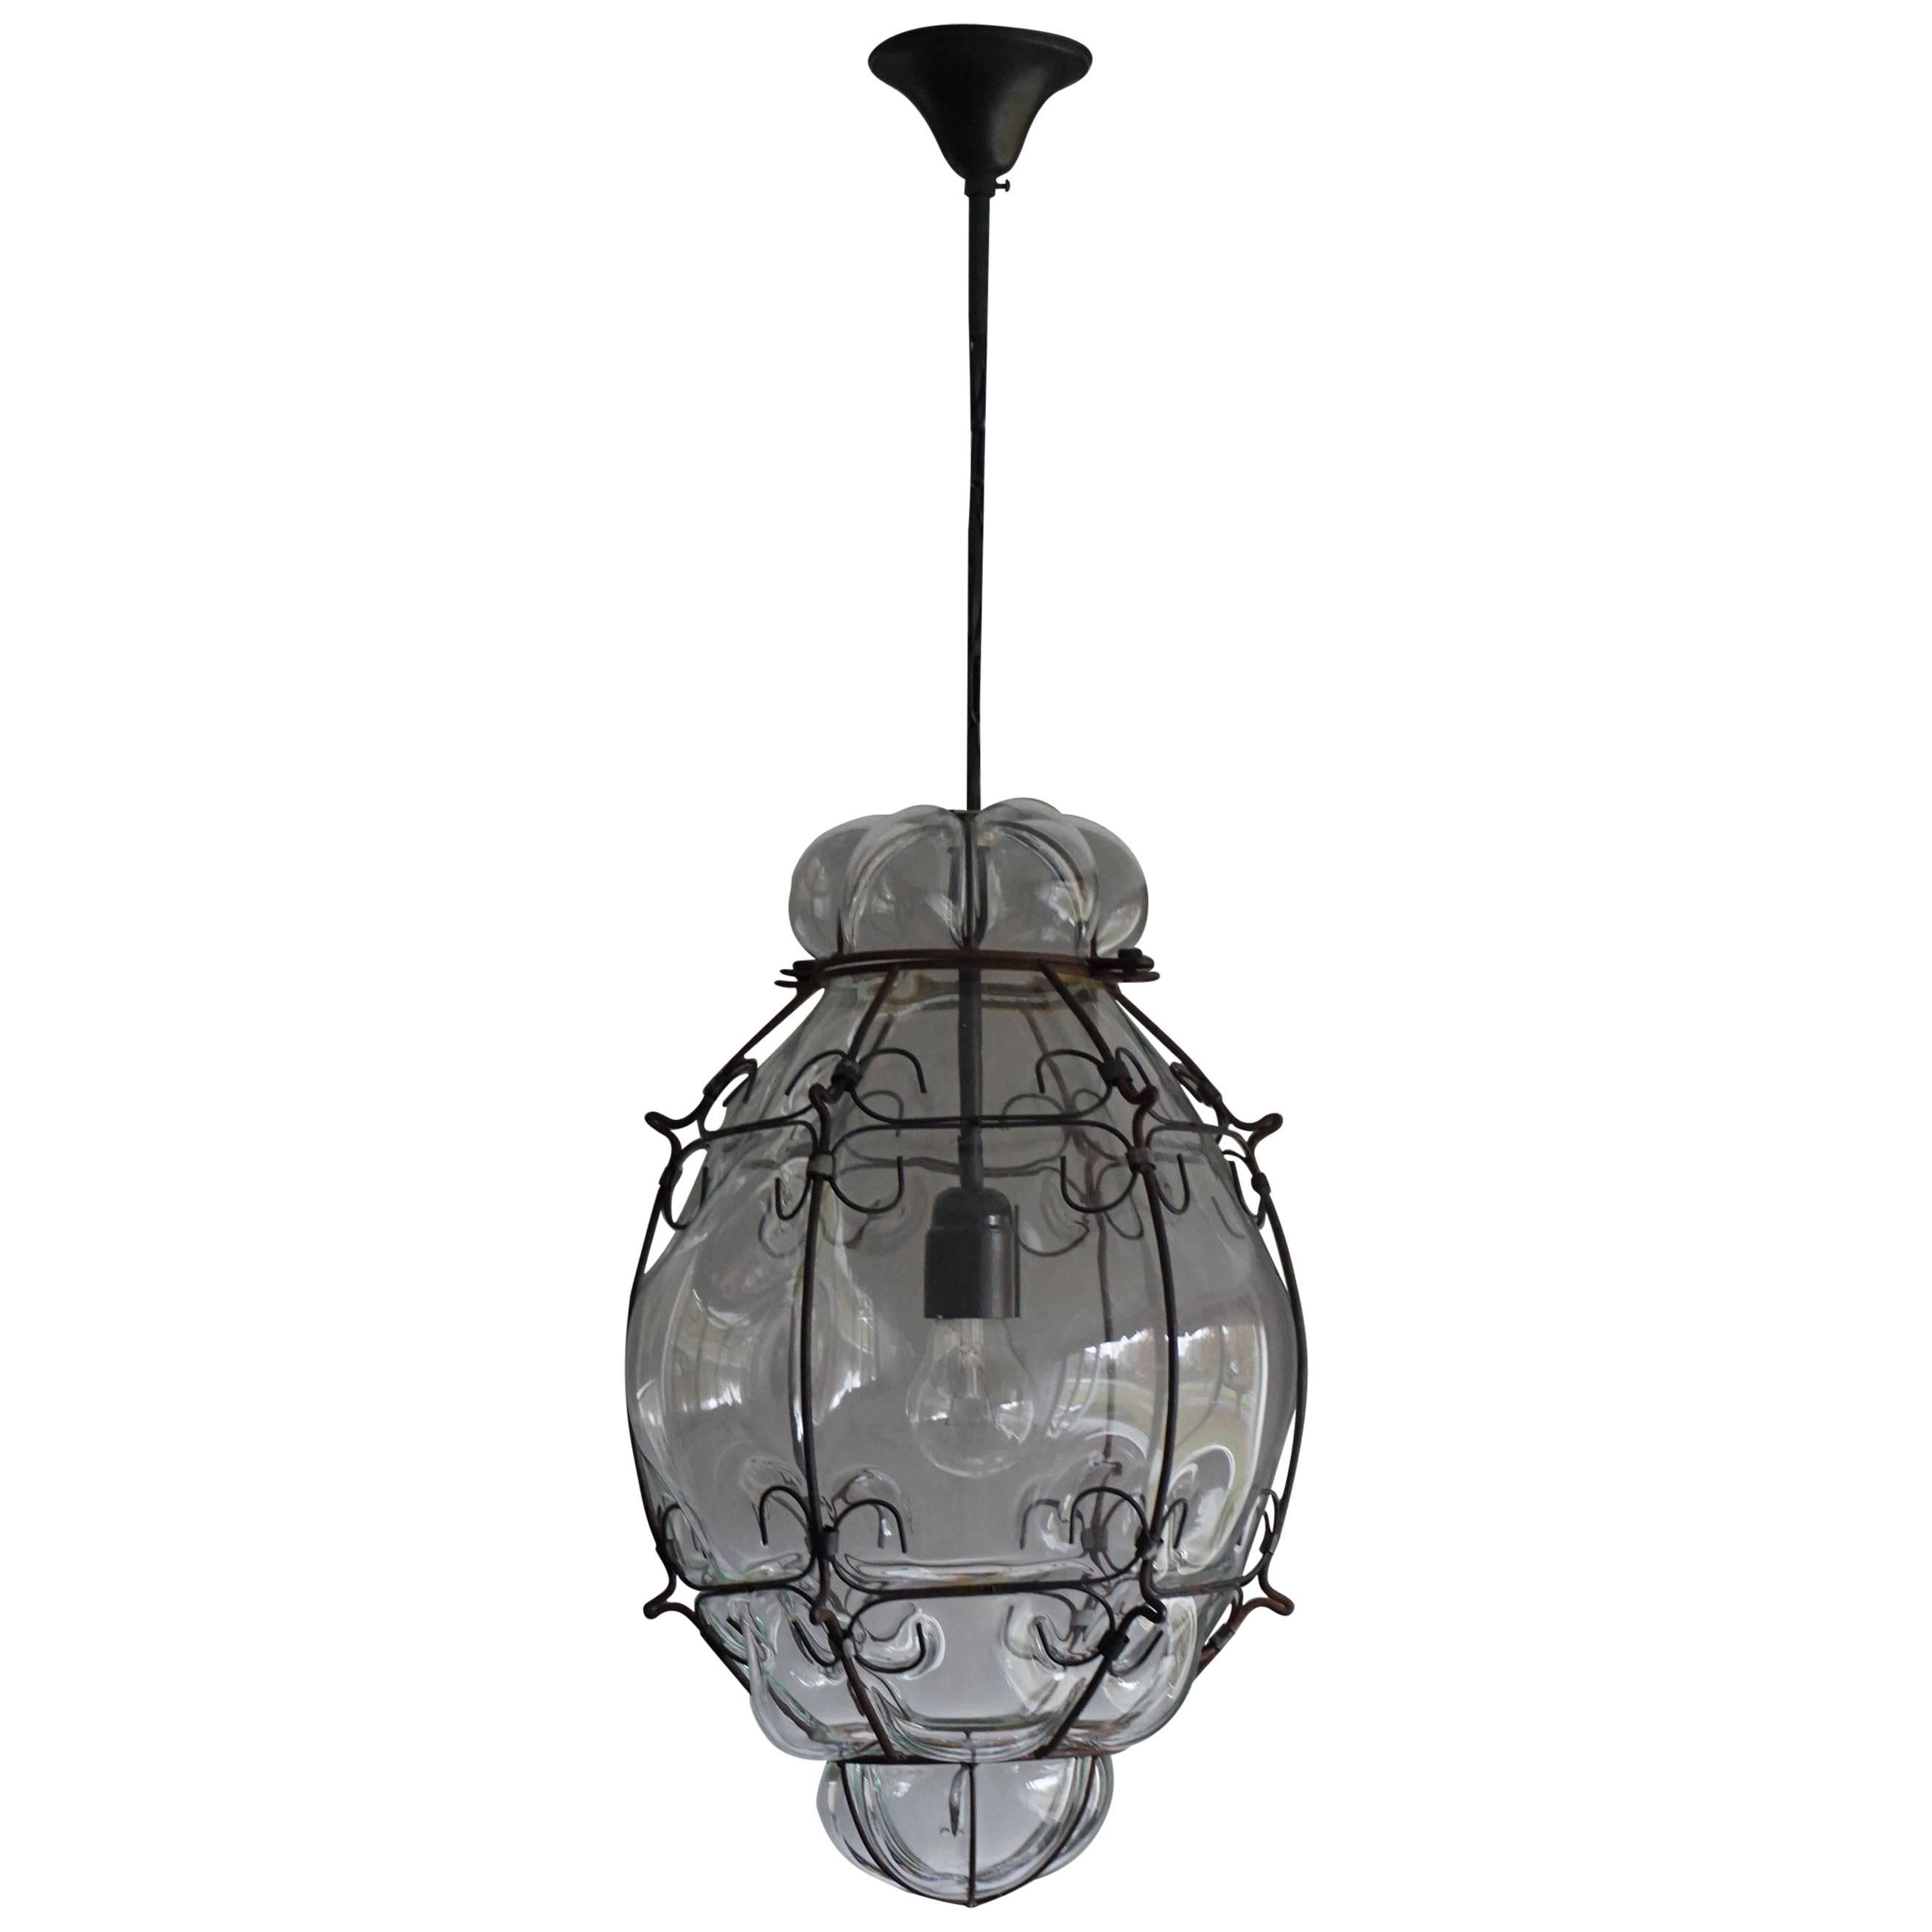 Stylish and Handcrafted Venetian Pendant Blown Glass in Metal Frame Ceiling Lamp